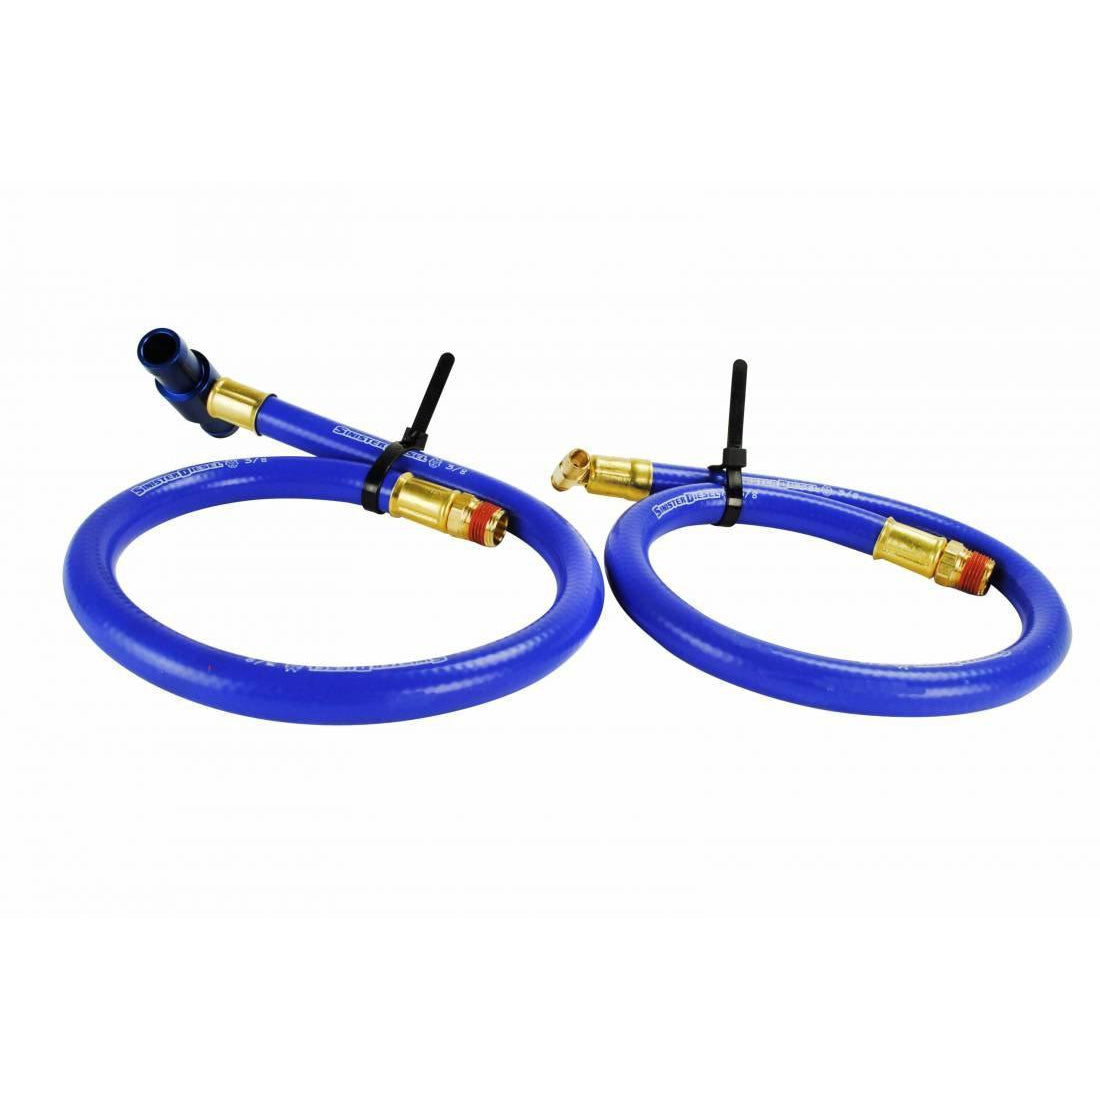 2003-2007 Powerstroke Replacement Coolant Filter Hose Old Style (SD-6.0PCFH03-01-20)-Coolant Hose Kit-Sinister-SD-6.0PCFH03-01-20-Dirty Diesel Customs